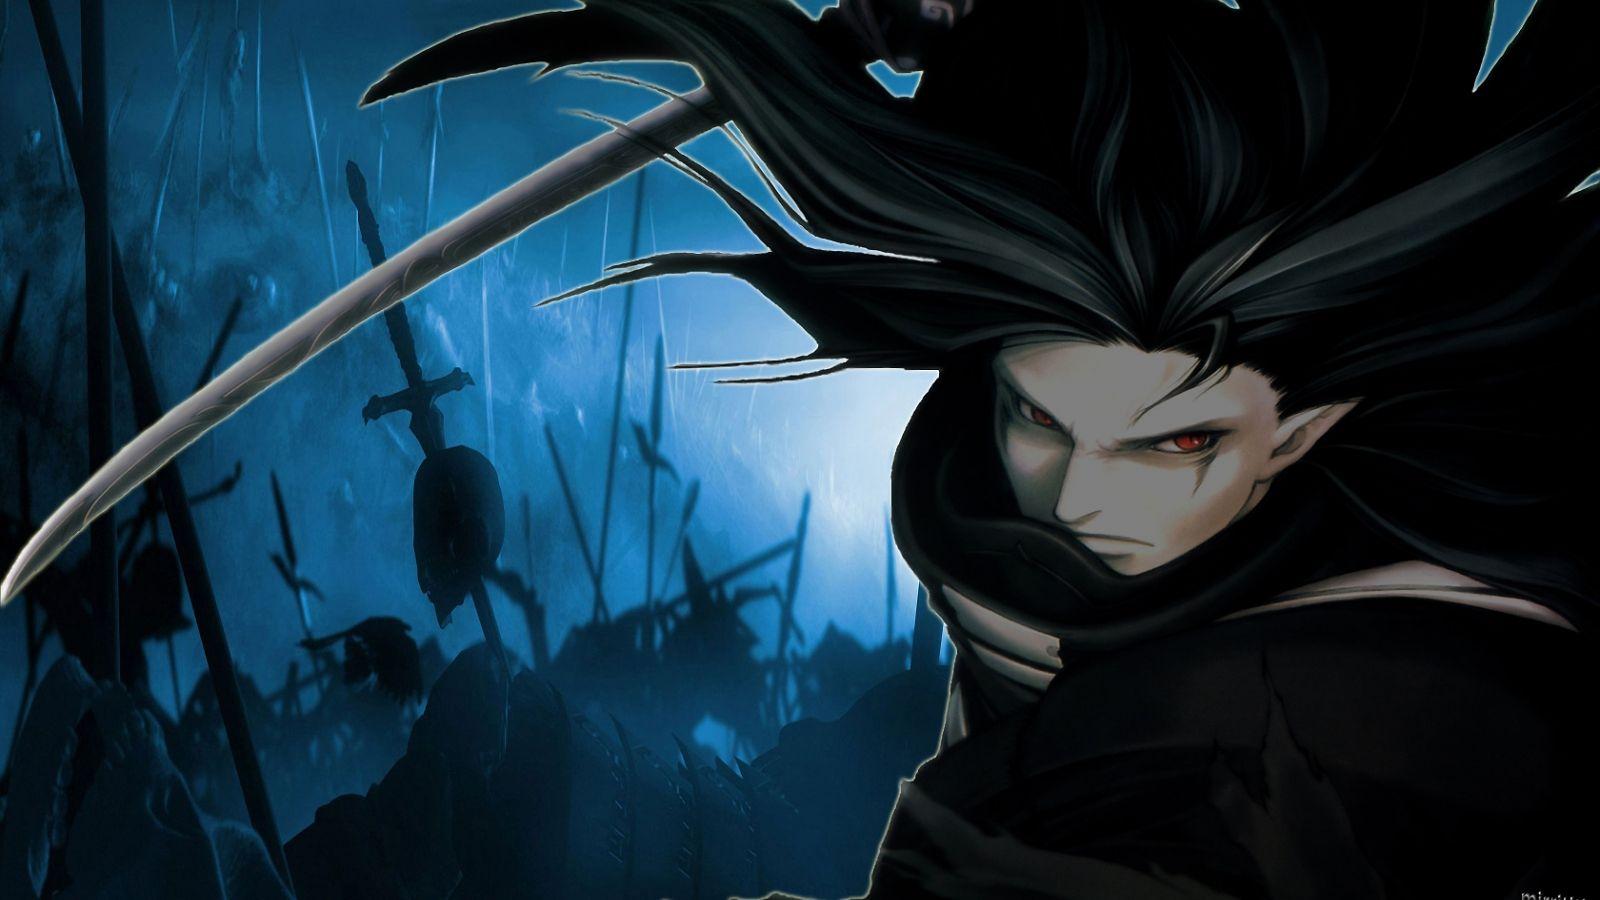 510585 1920x1080 wallpapers free vampire hunter d  Rare Gallery HD  Wallpapers